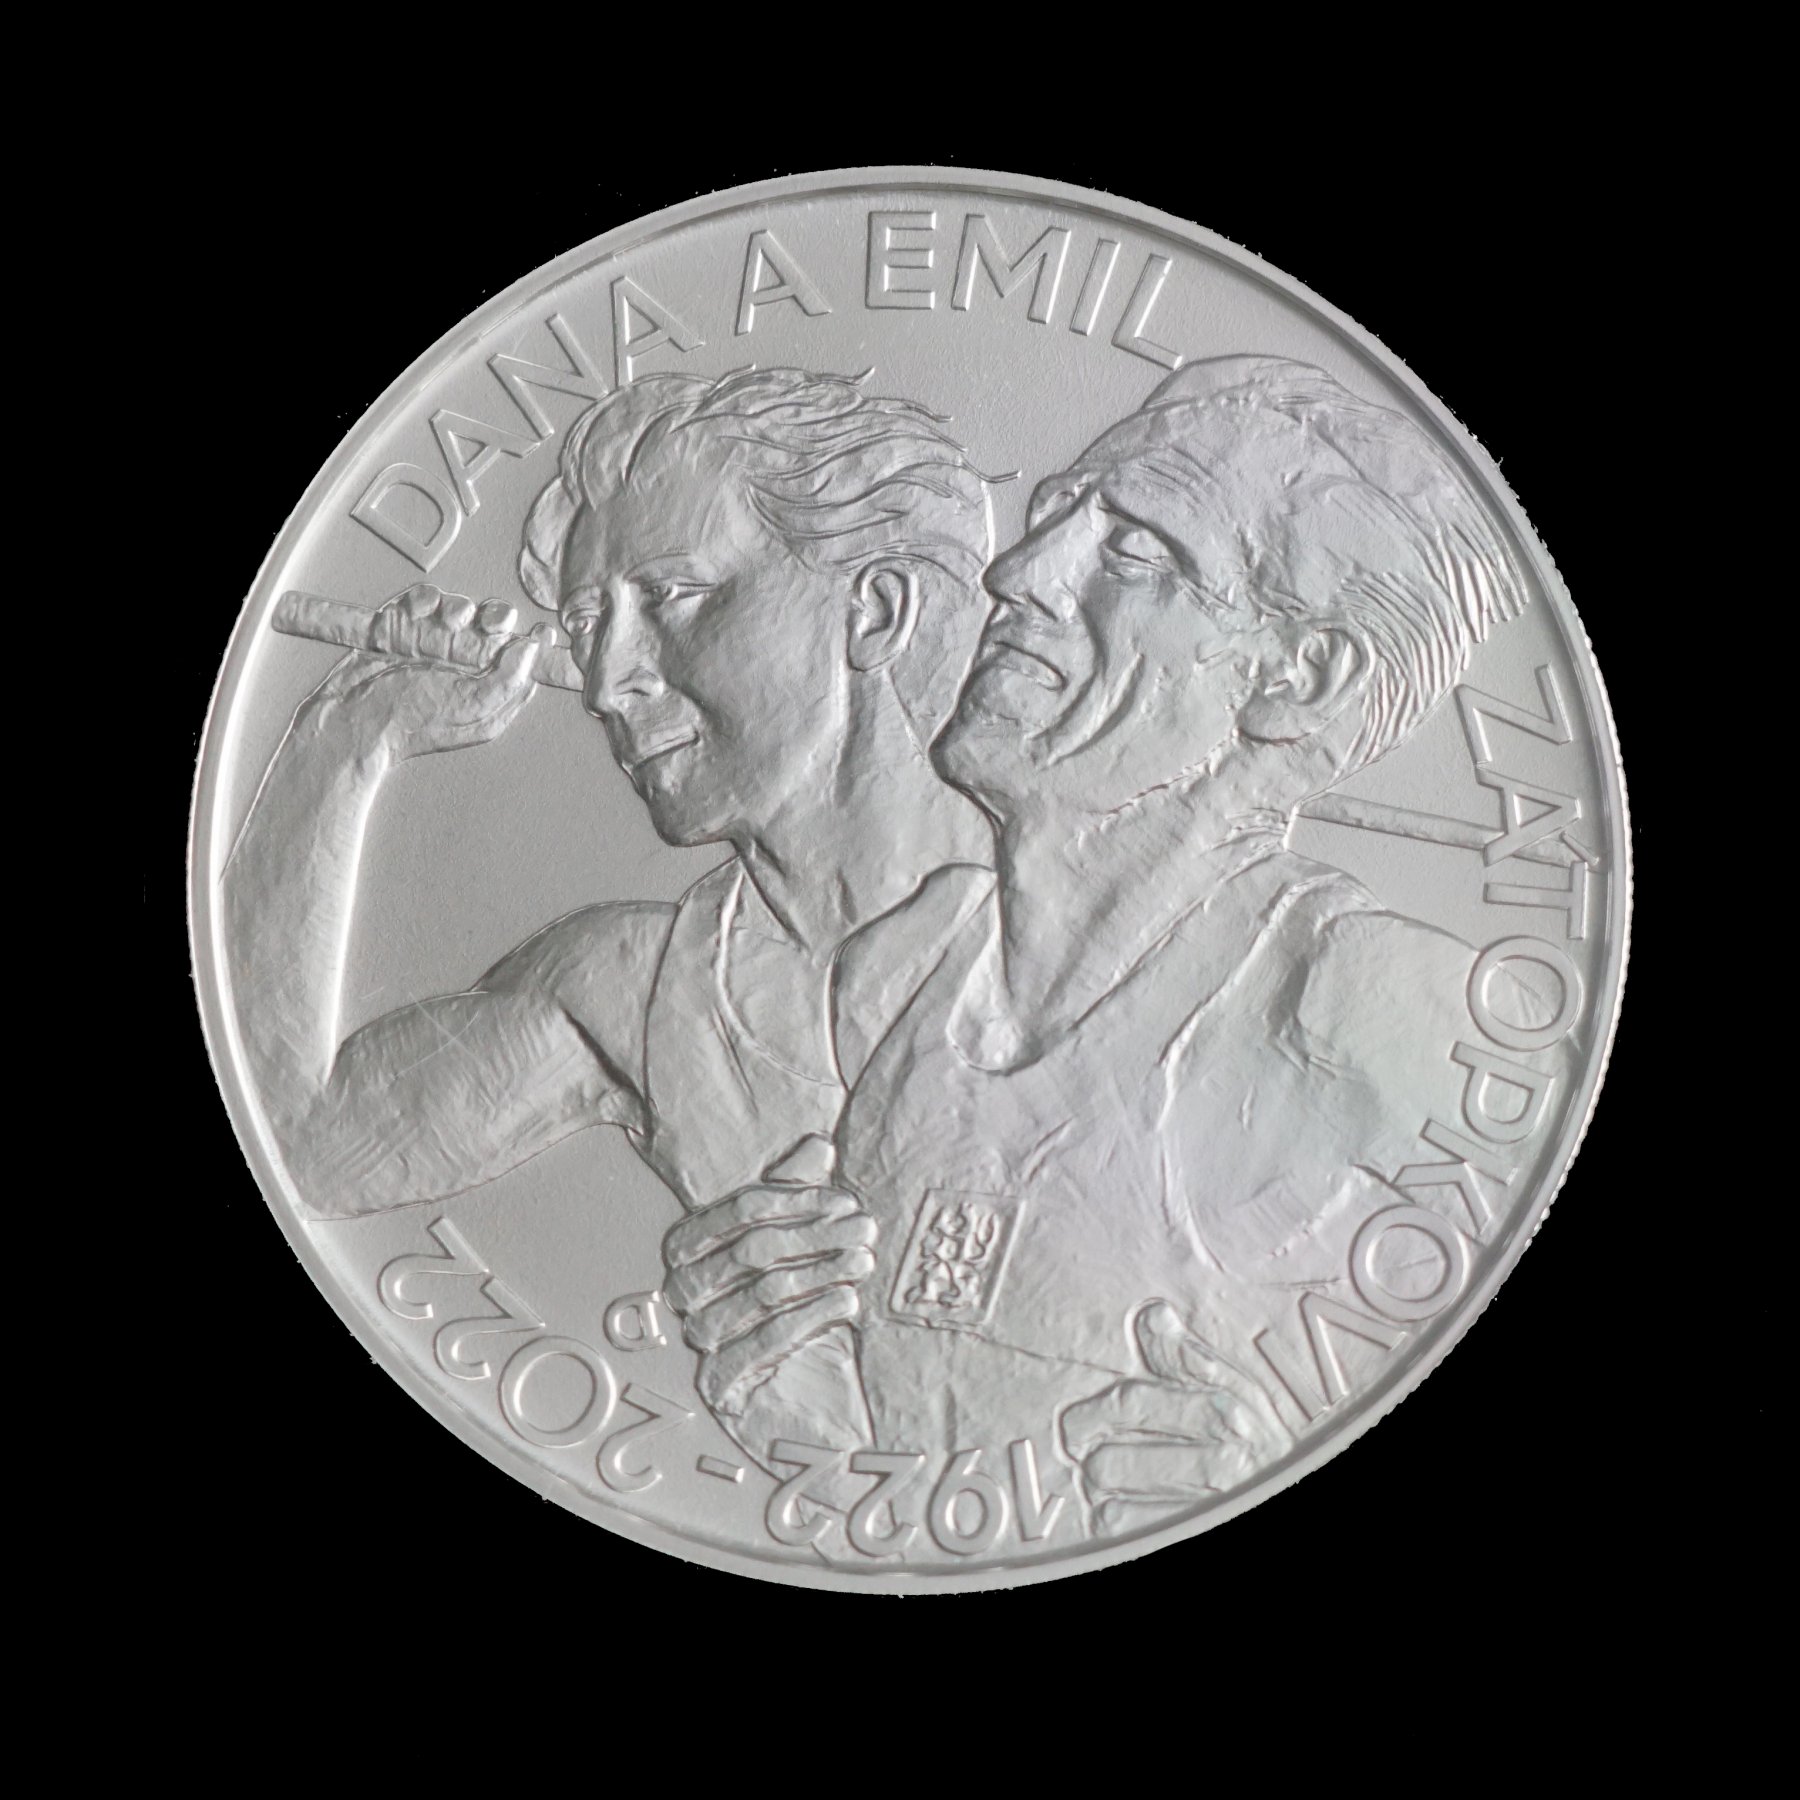 Commemorative silver coin for the 100th anniversary of the birth of Dana and Emil Zátopek